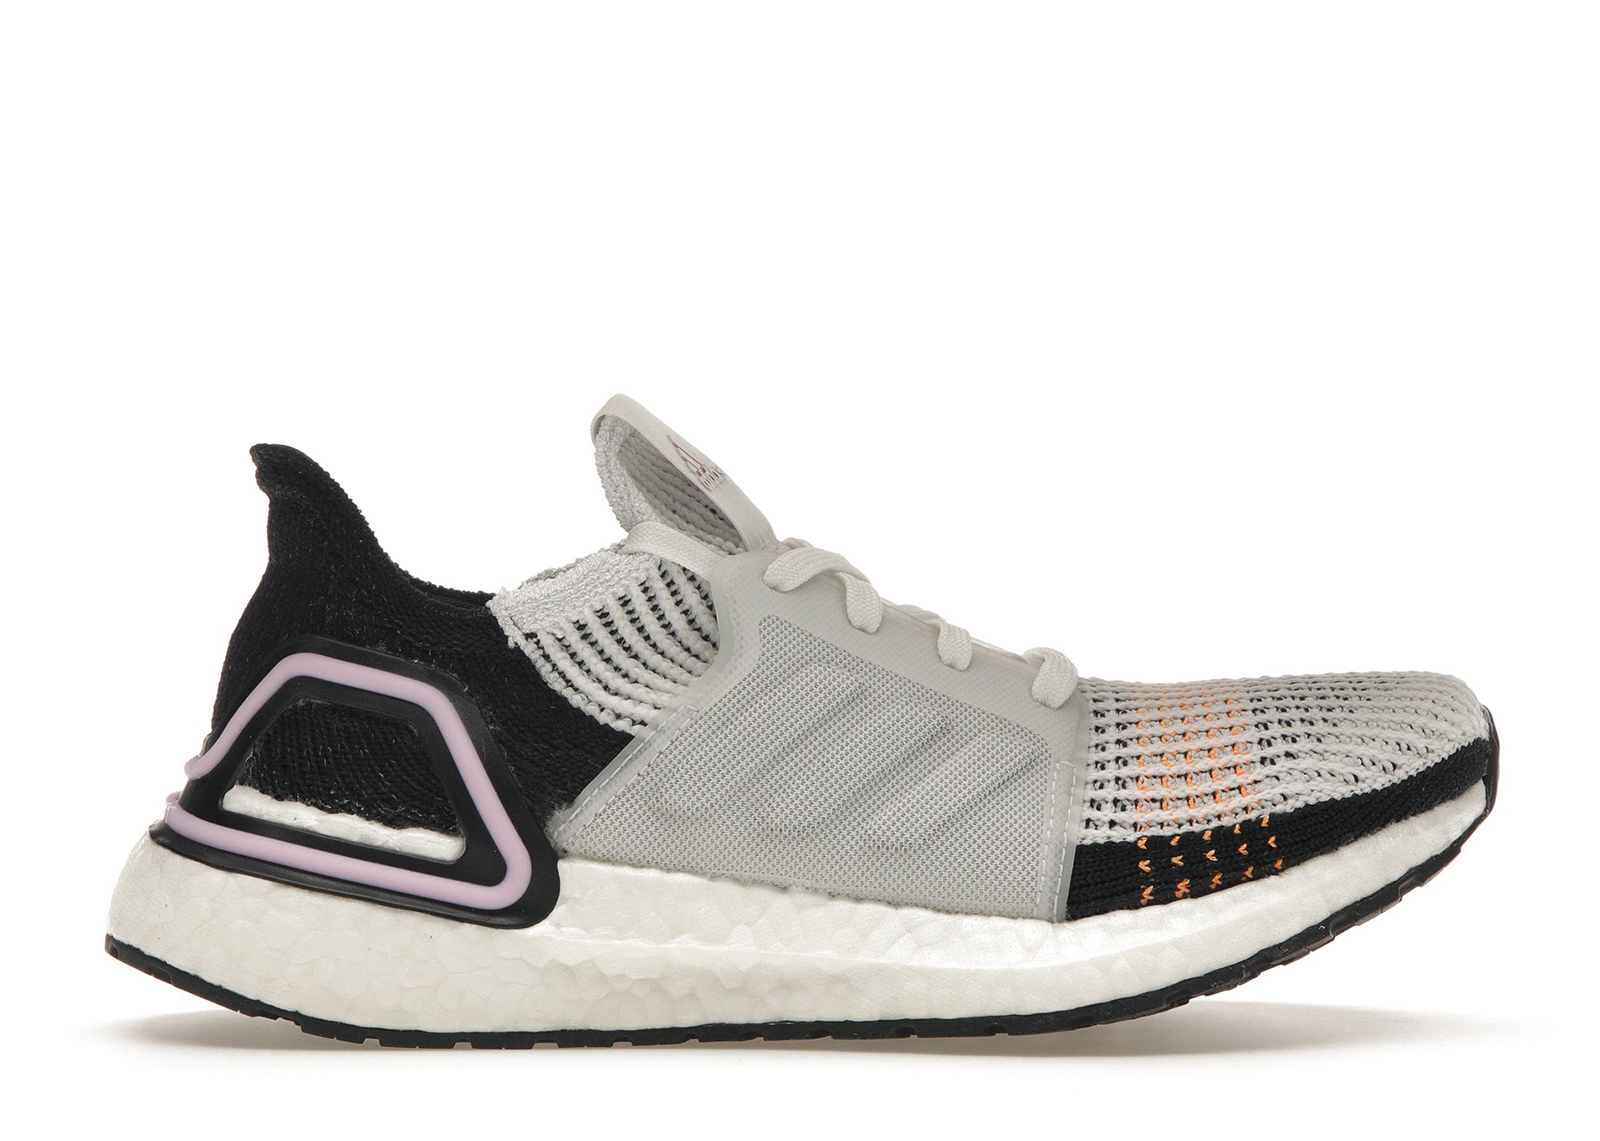 adidas Ultra Boost 19 Crystal White (Women's) - G27481 - US